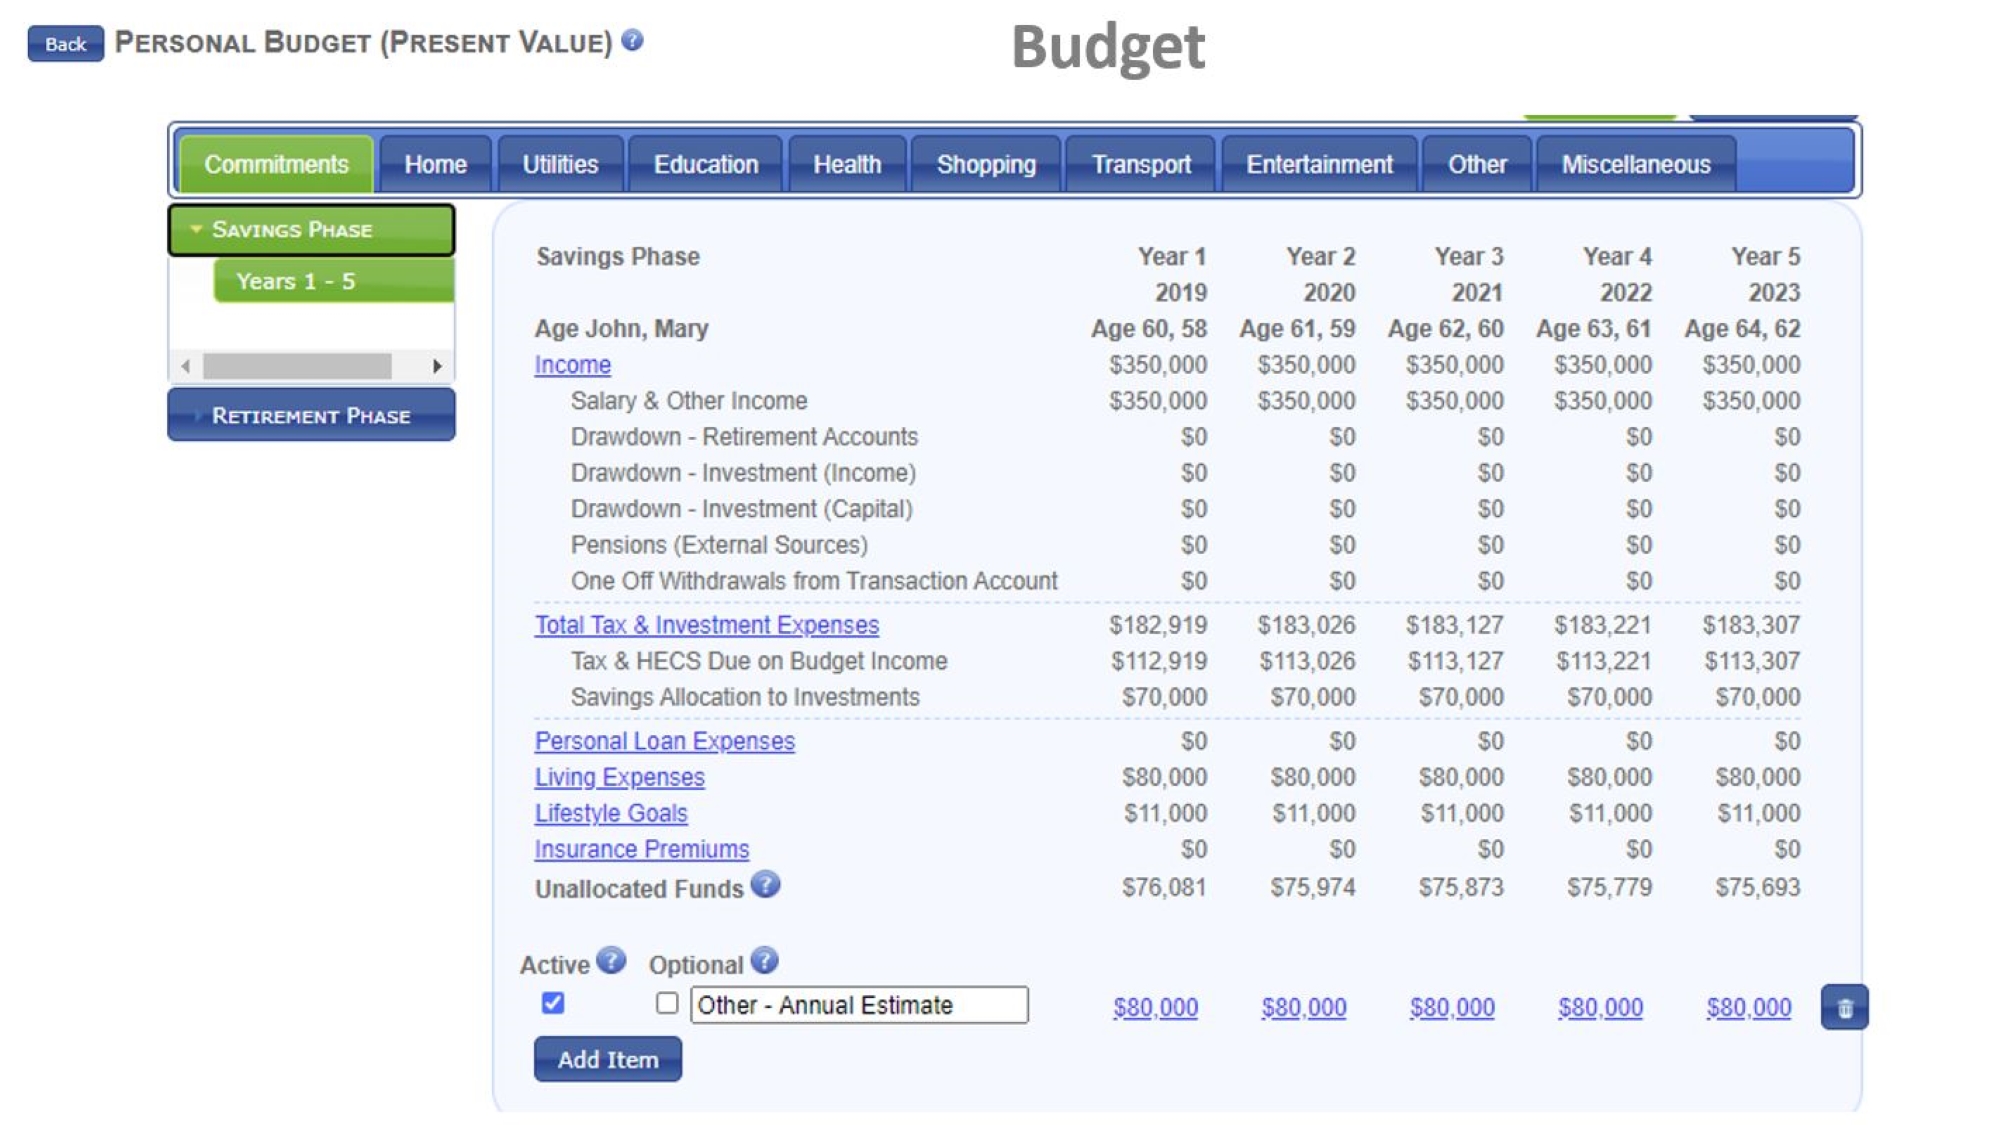 Personal Budget displaying Income, Tax, Personal Loan Expenses, Lifestyle Goals and Insurance Premiums.